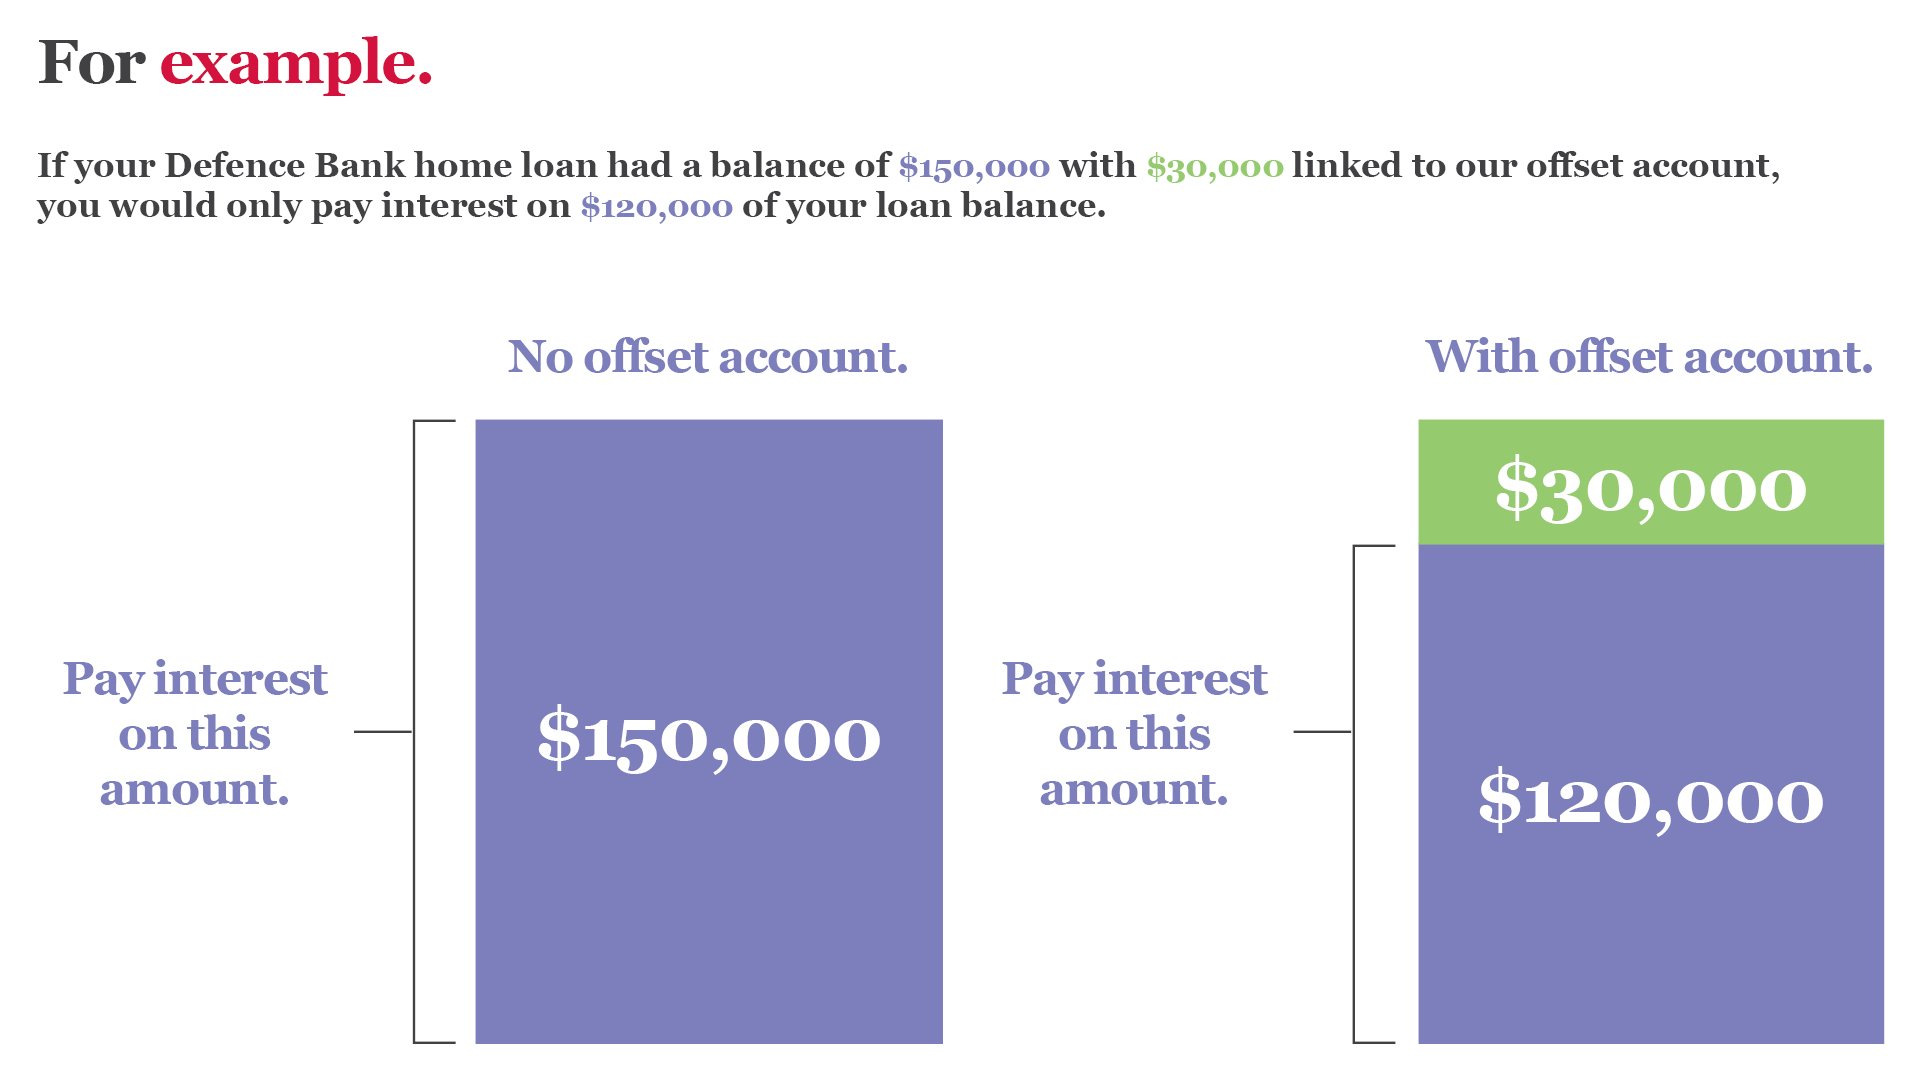 If your Defence Bank home loan had a balance of $150,000 with $30.000 linked to our offset account, you would only pay interest on $120,000 of your loan balance.